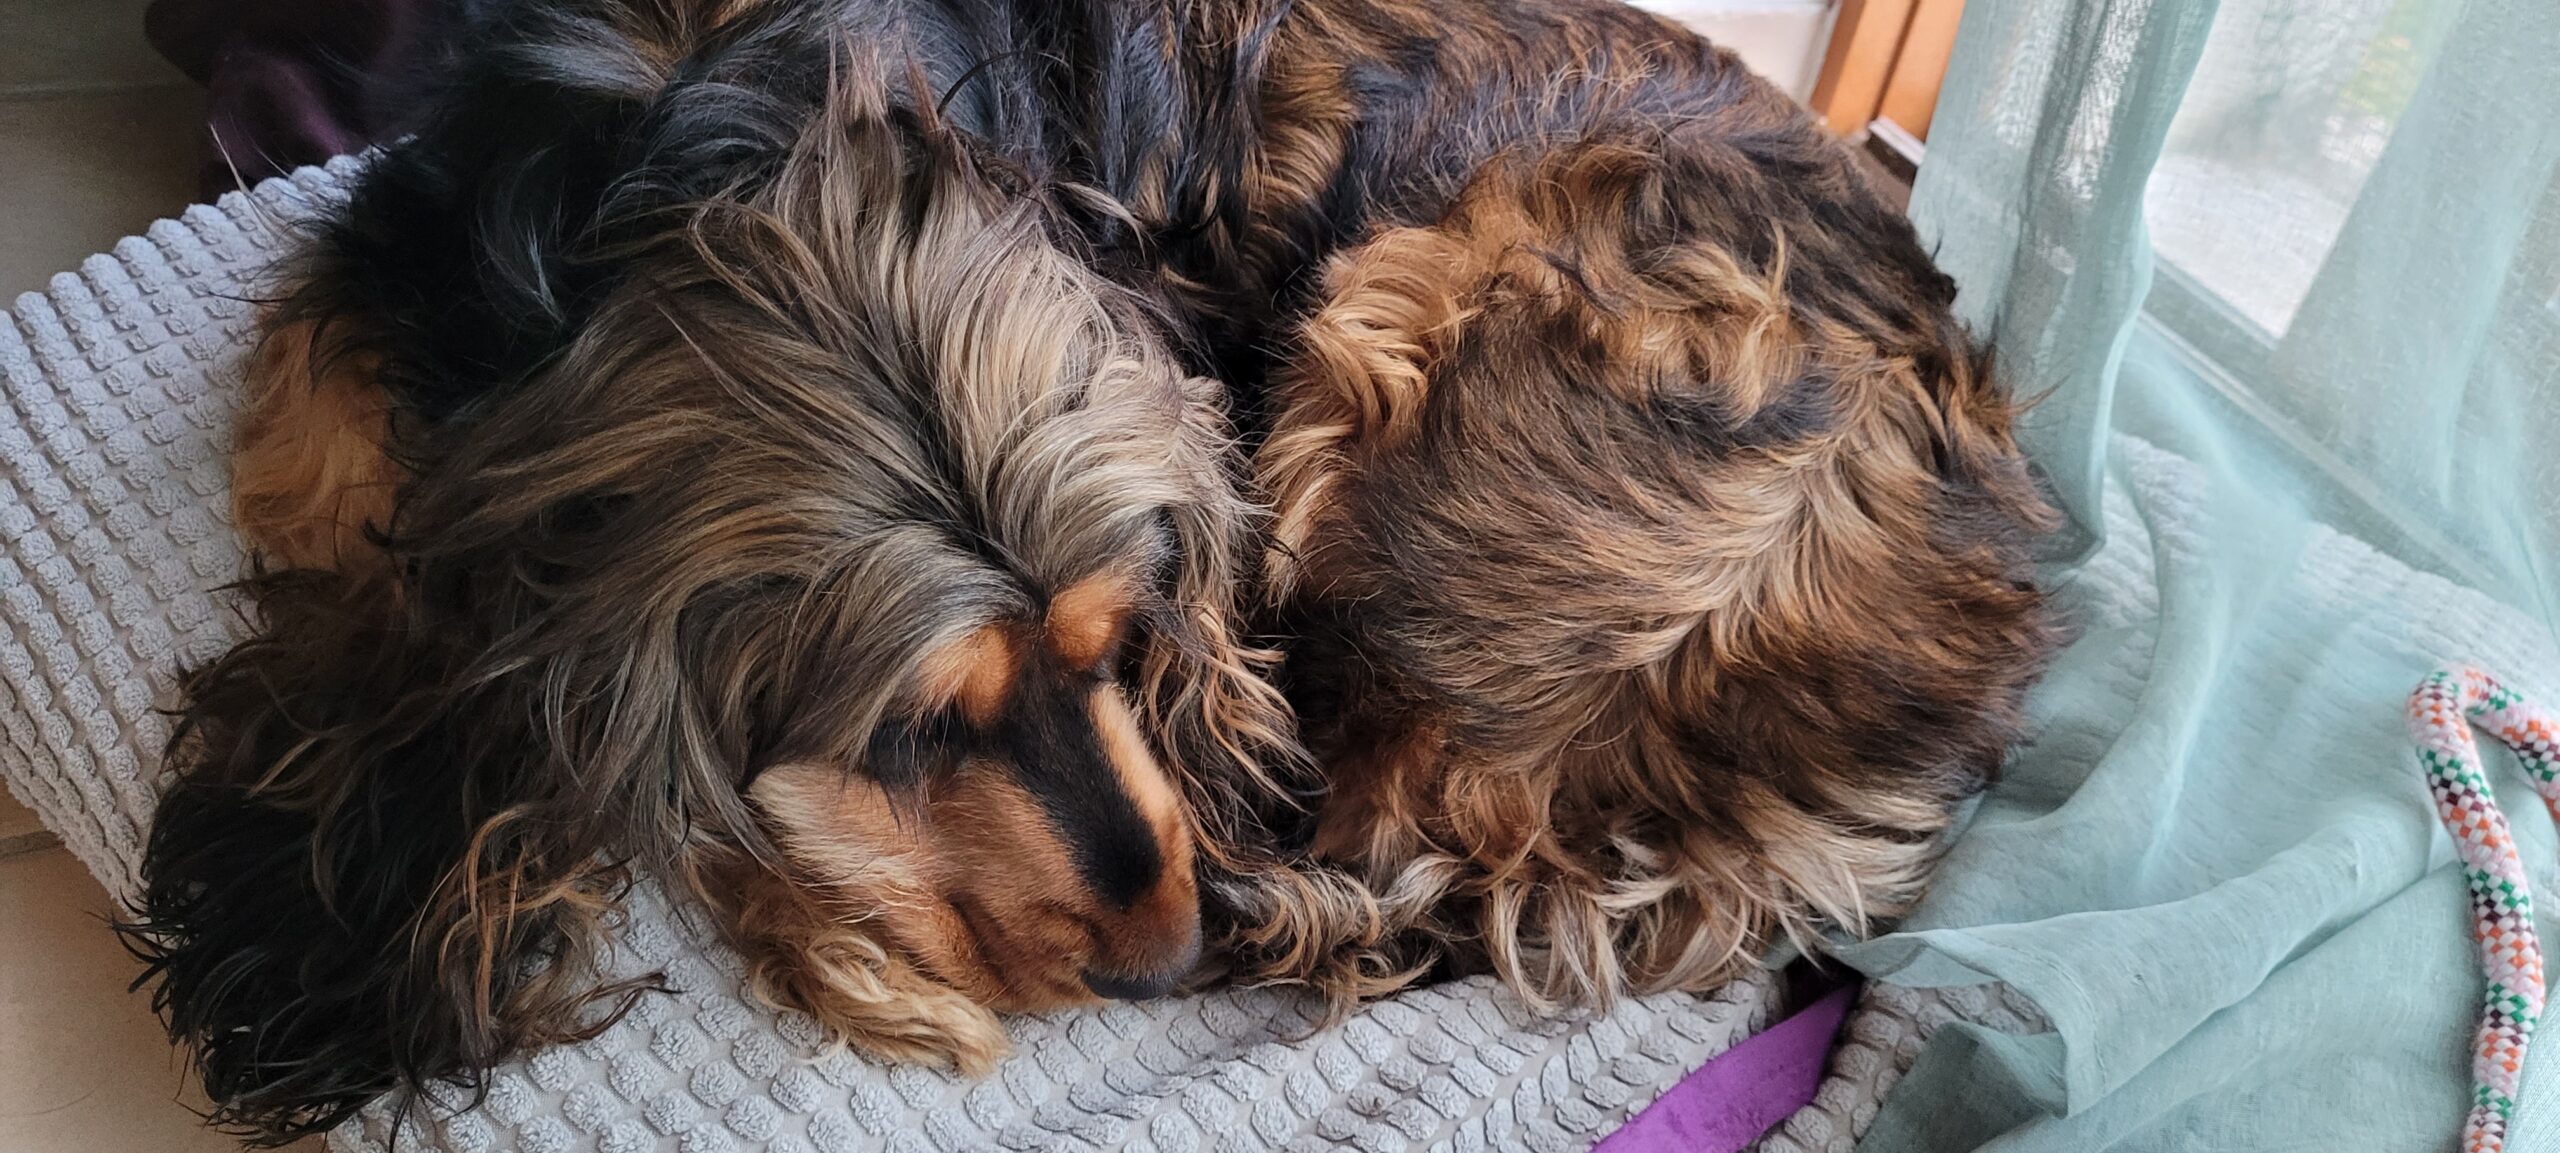 a cocker spaniel curled up sleeping